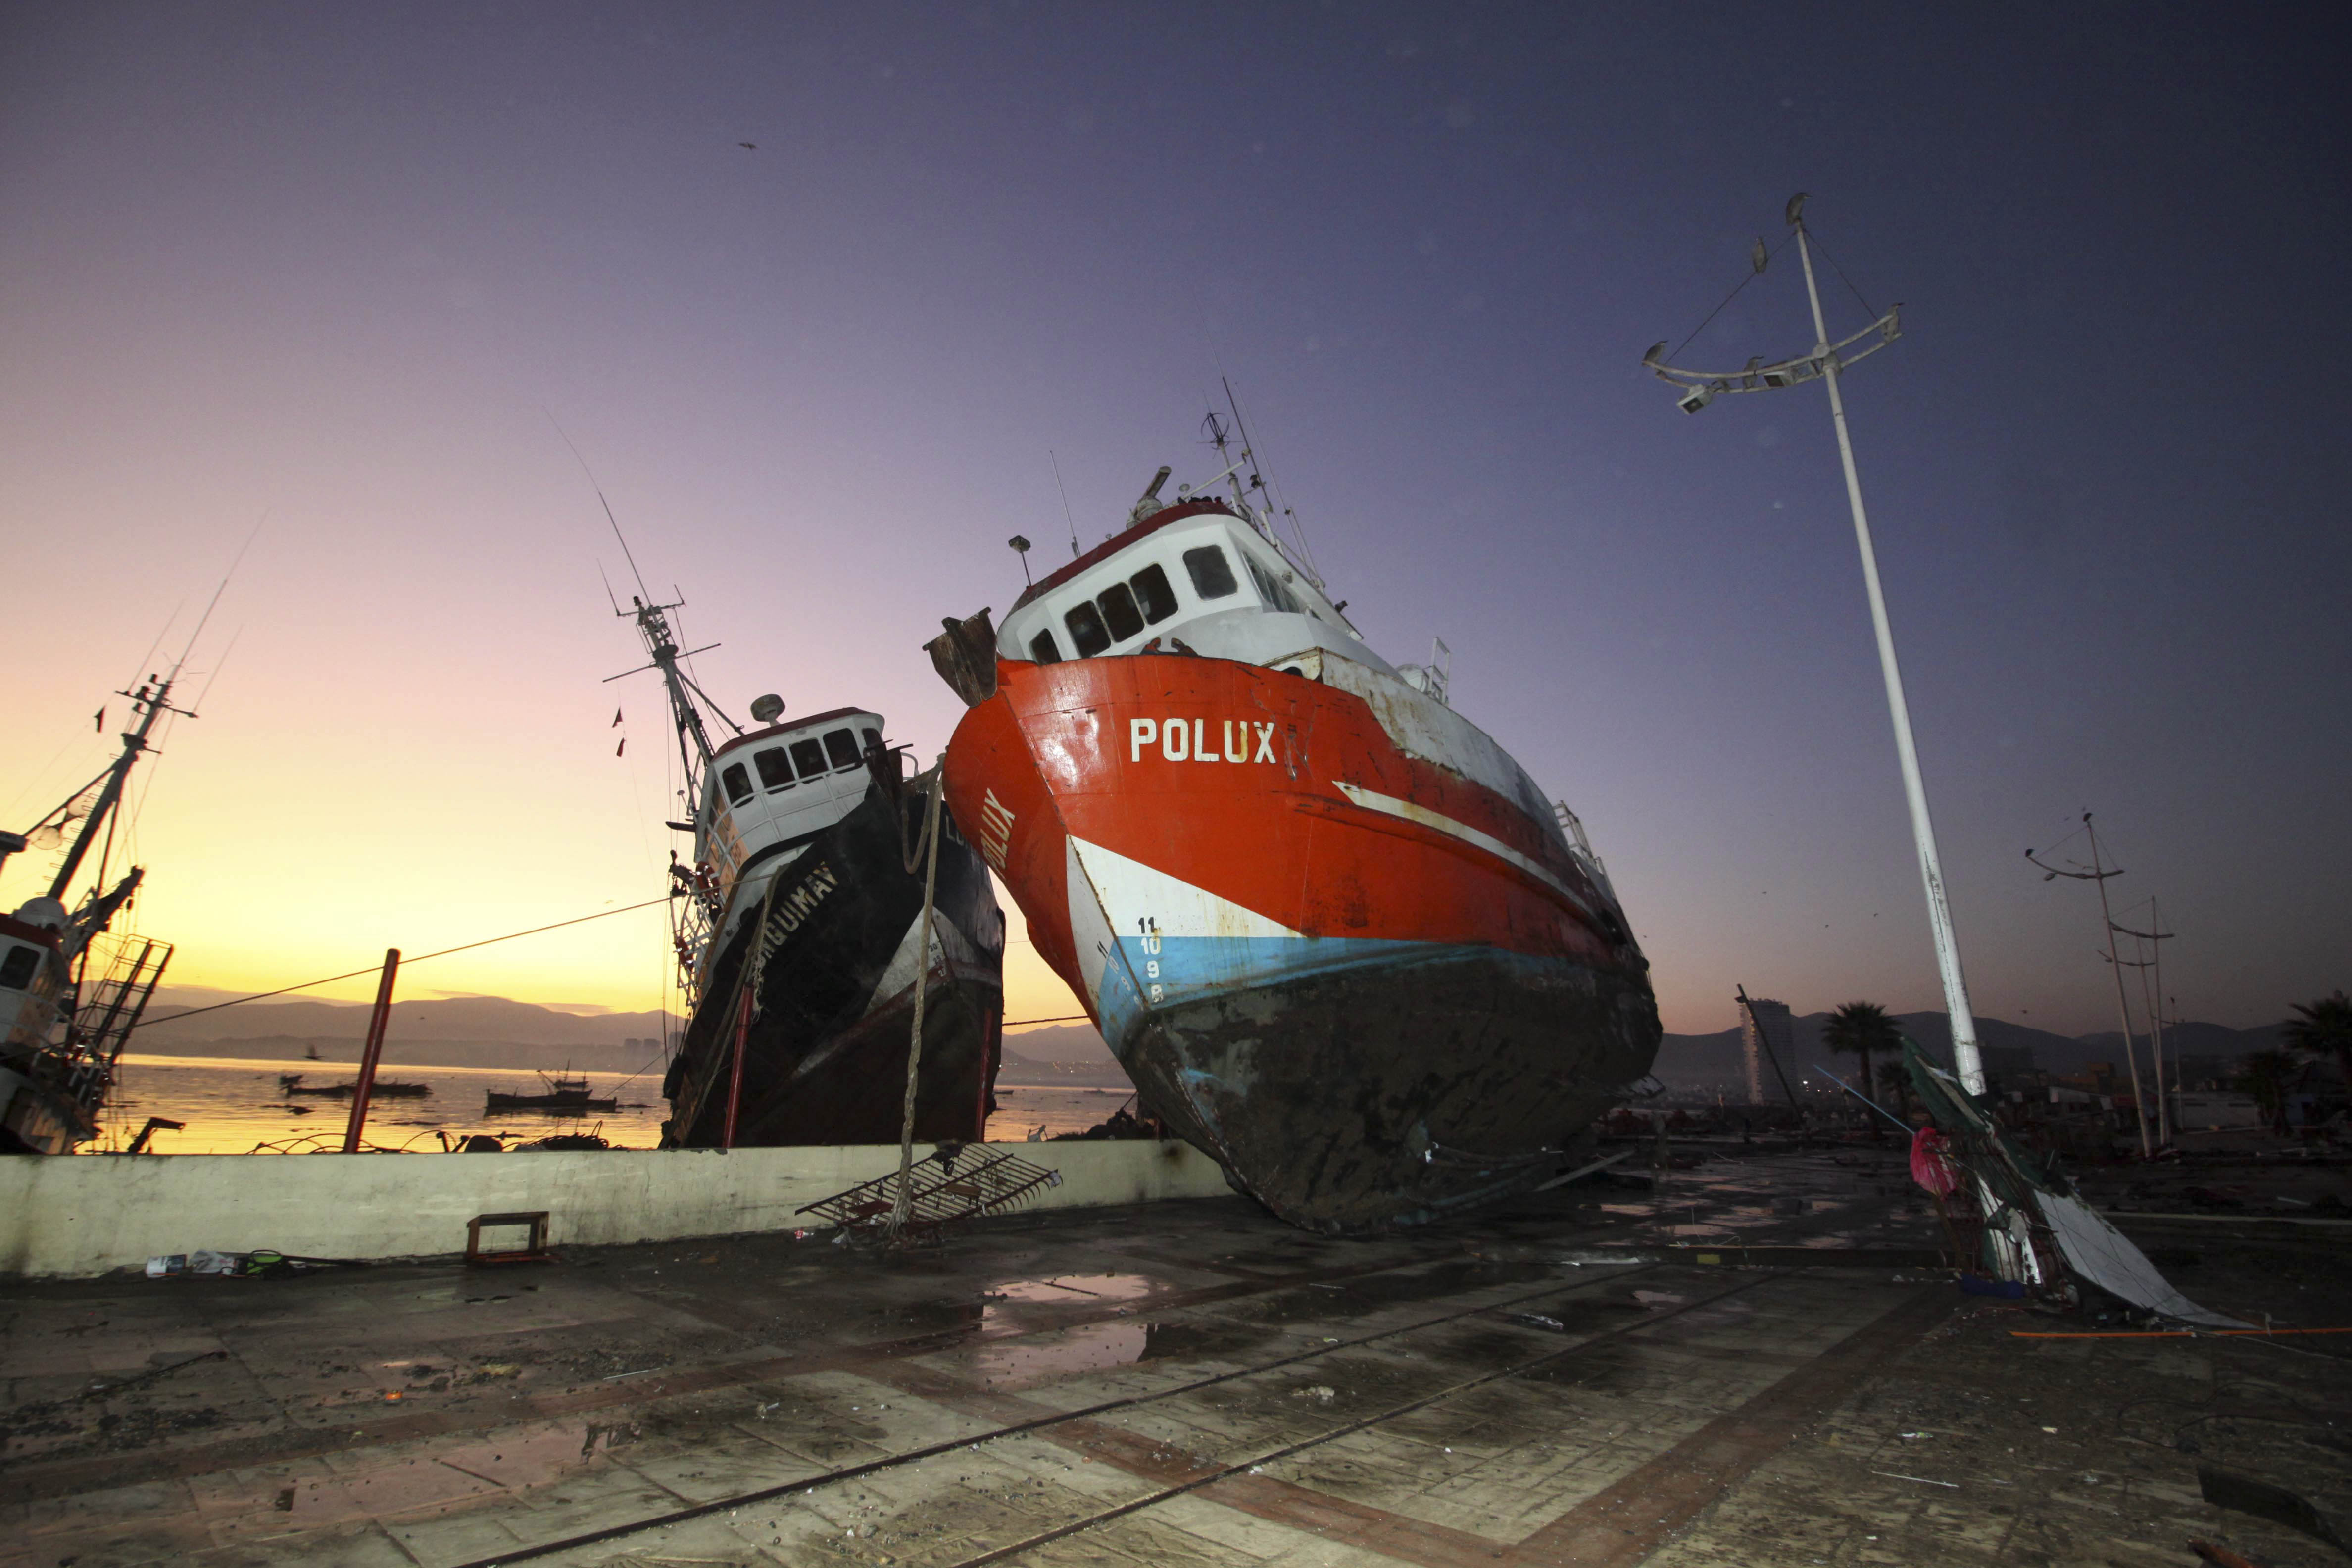 A boat stands on a dock after it was lifted by an earthquake-triggered tsunami in Coquimbo, Chile, Thursday, Sept. 17, 2015. Several coastal towns were flooded from small tsunami waves set off by late Wednesday's magnitude-8.3 earthquake, which shook the Earth so strongly that rumbles were felt across South America. (Hernan Contreras&mdash;AP)